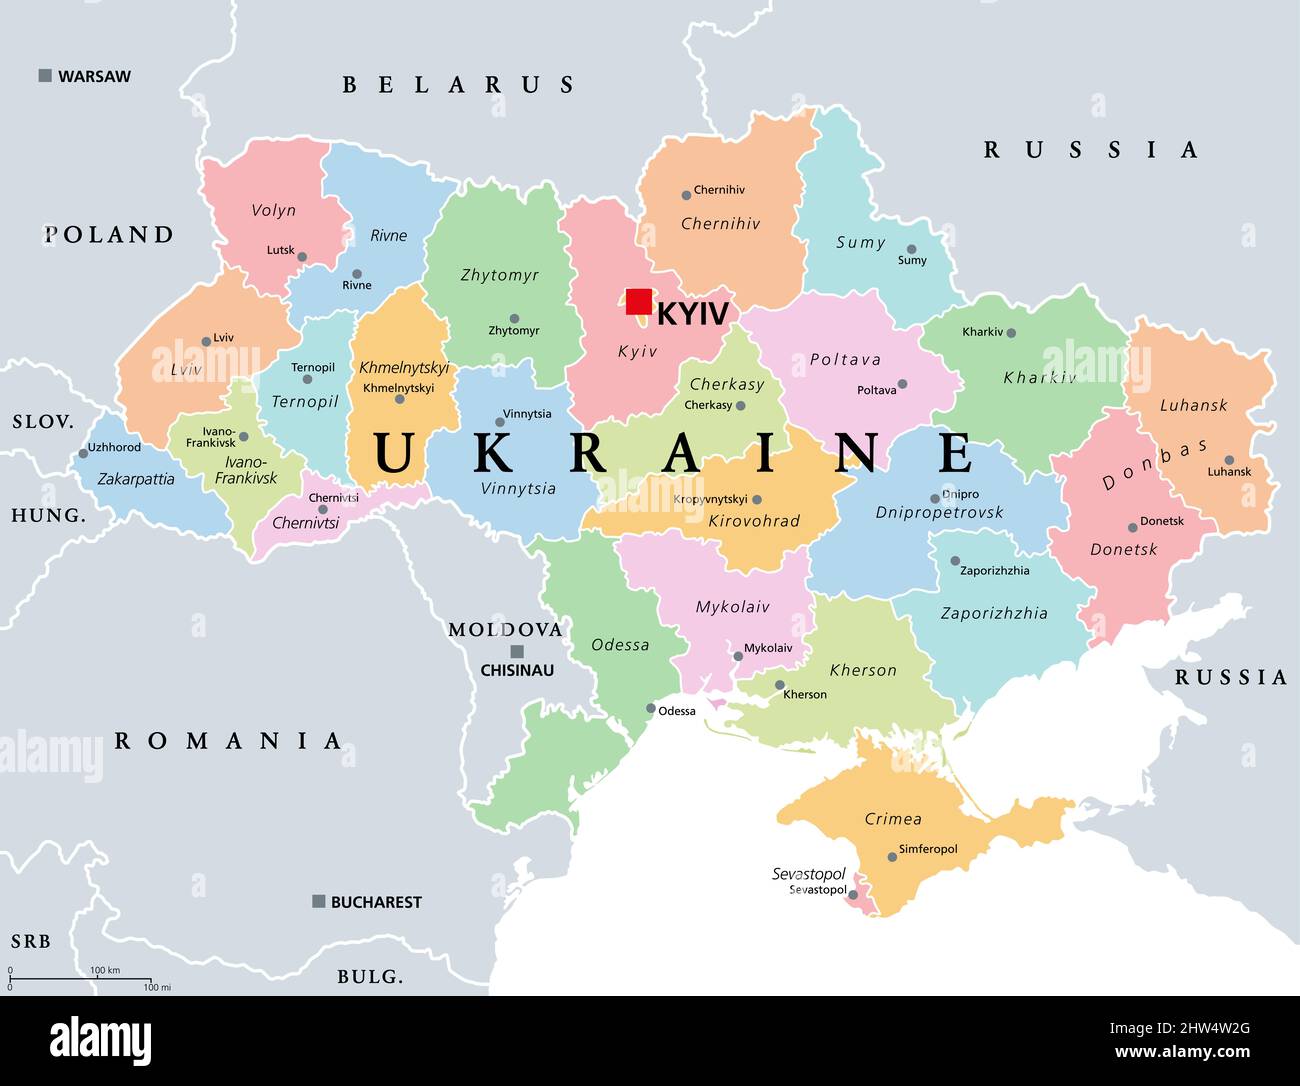 Ukraine, country subdivision, colored political map. Administrative divisions of Ukraine, with administrative centers, unitary state in Eastern Europe. Stock Photo